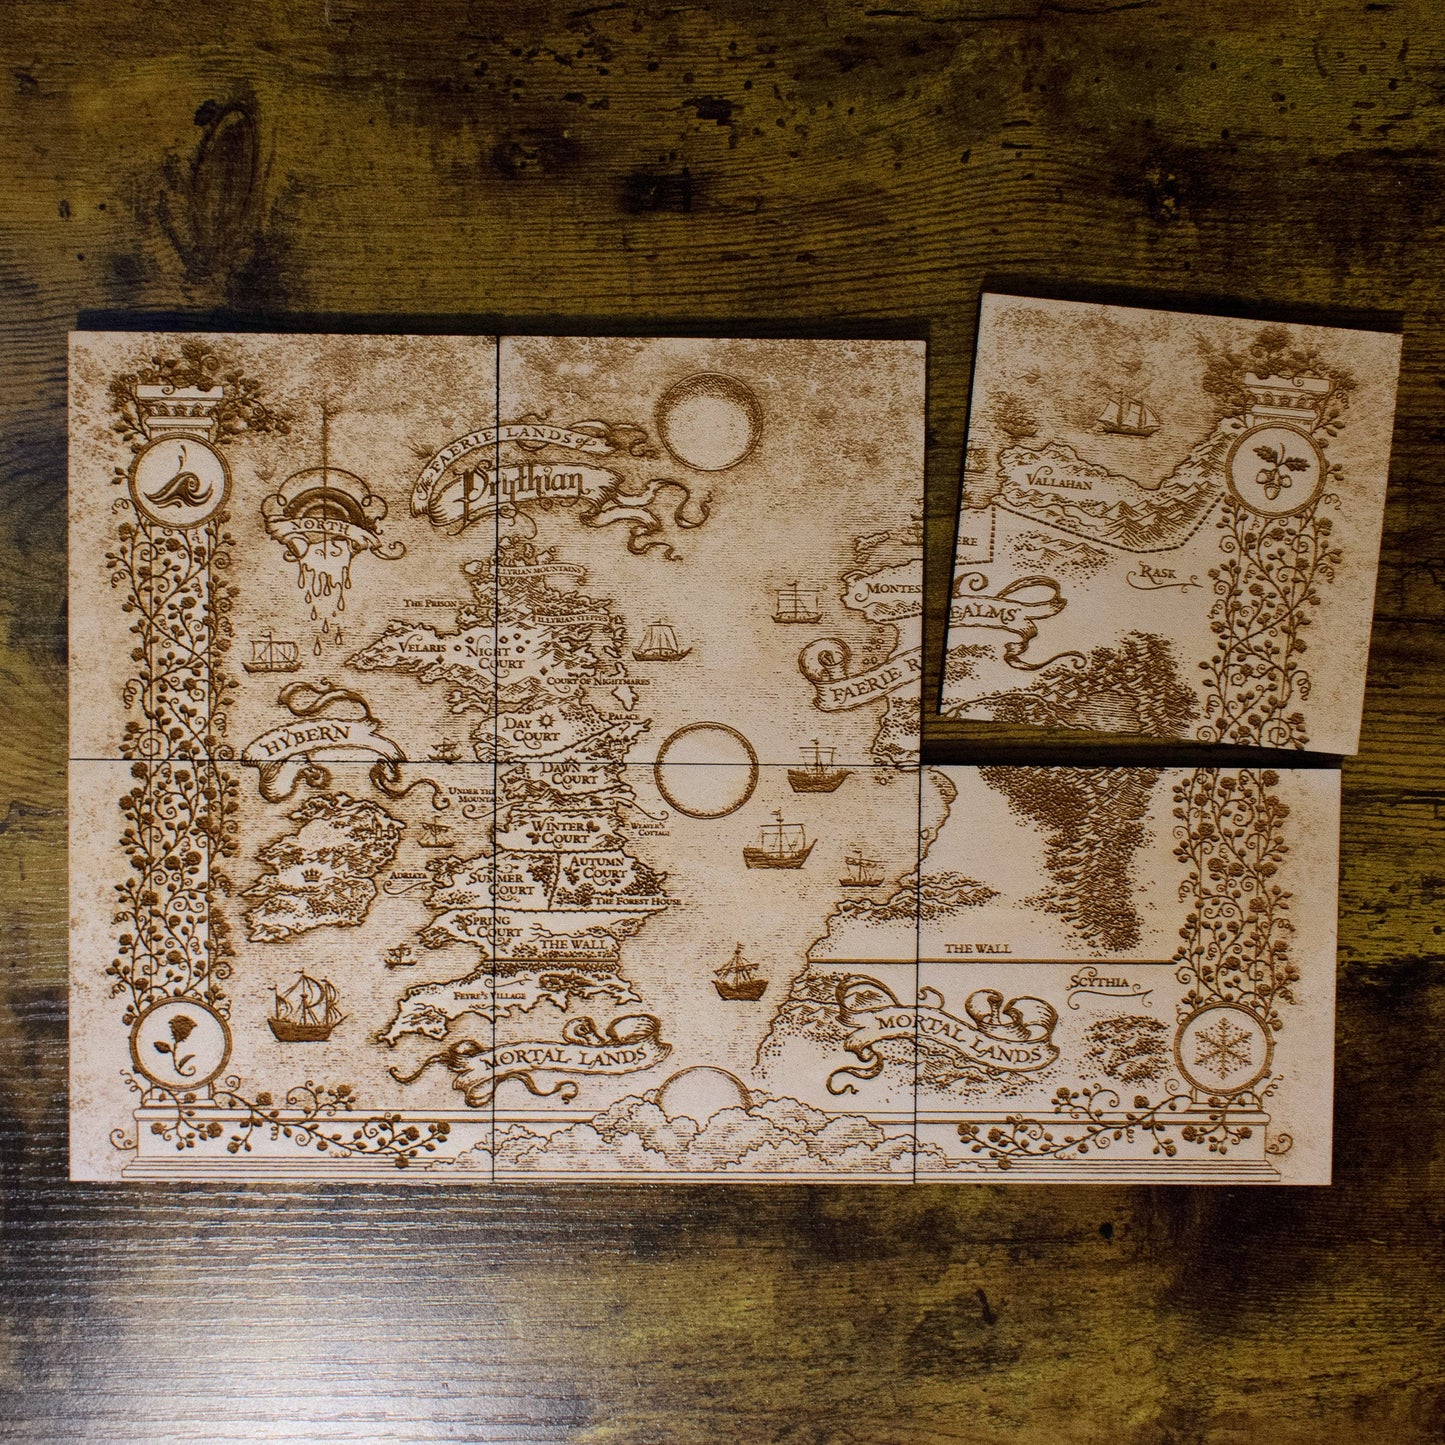 A Court of Thorns & Roses Map Coasters, ACOTAR Wood Coasters